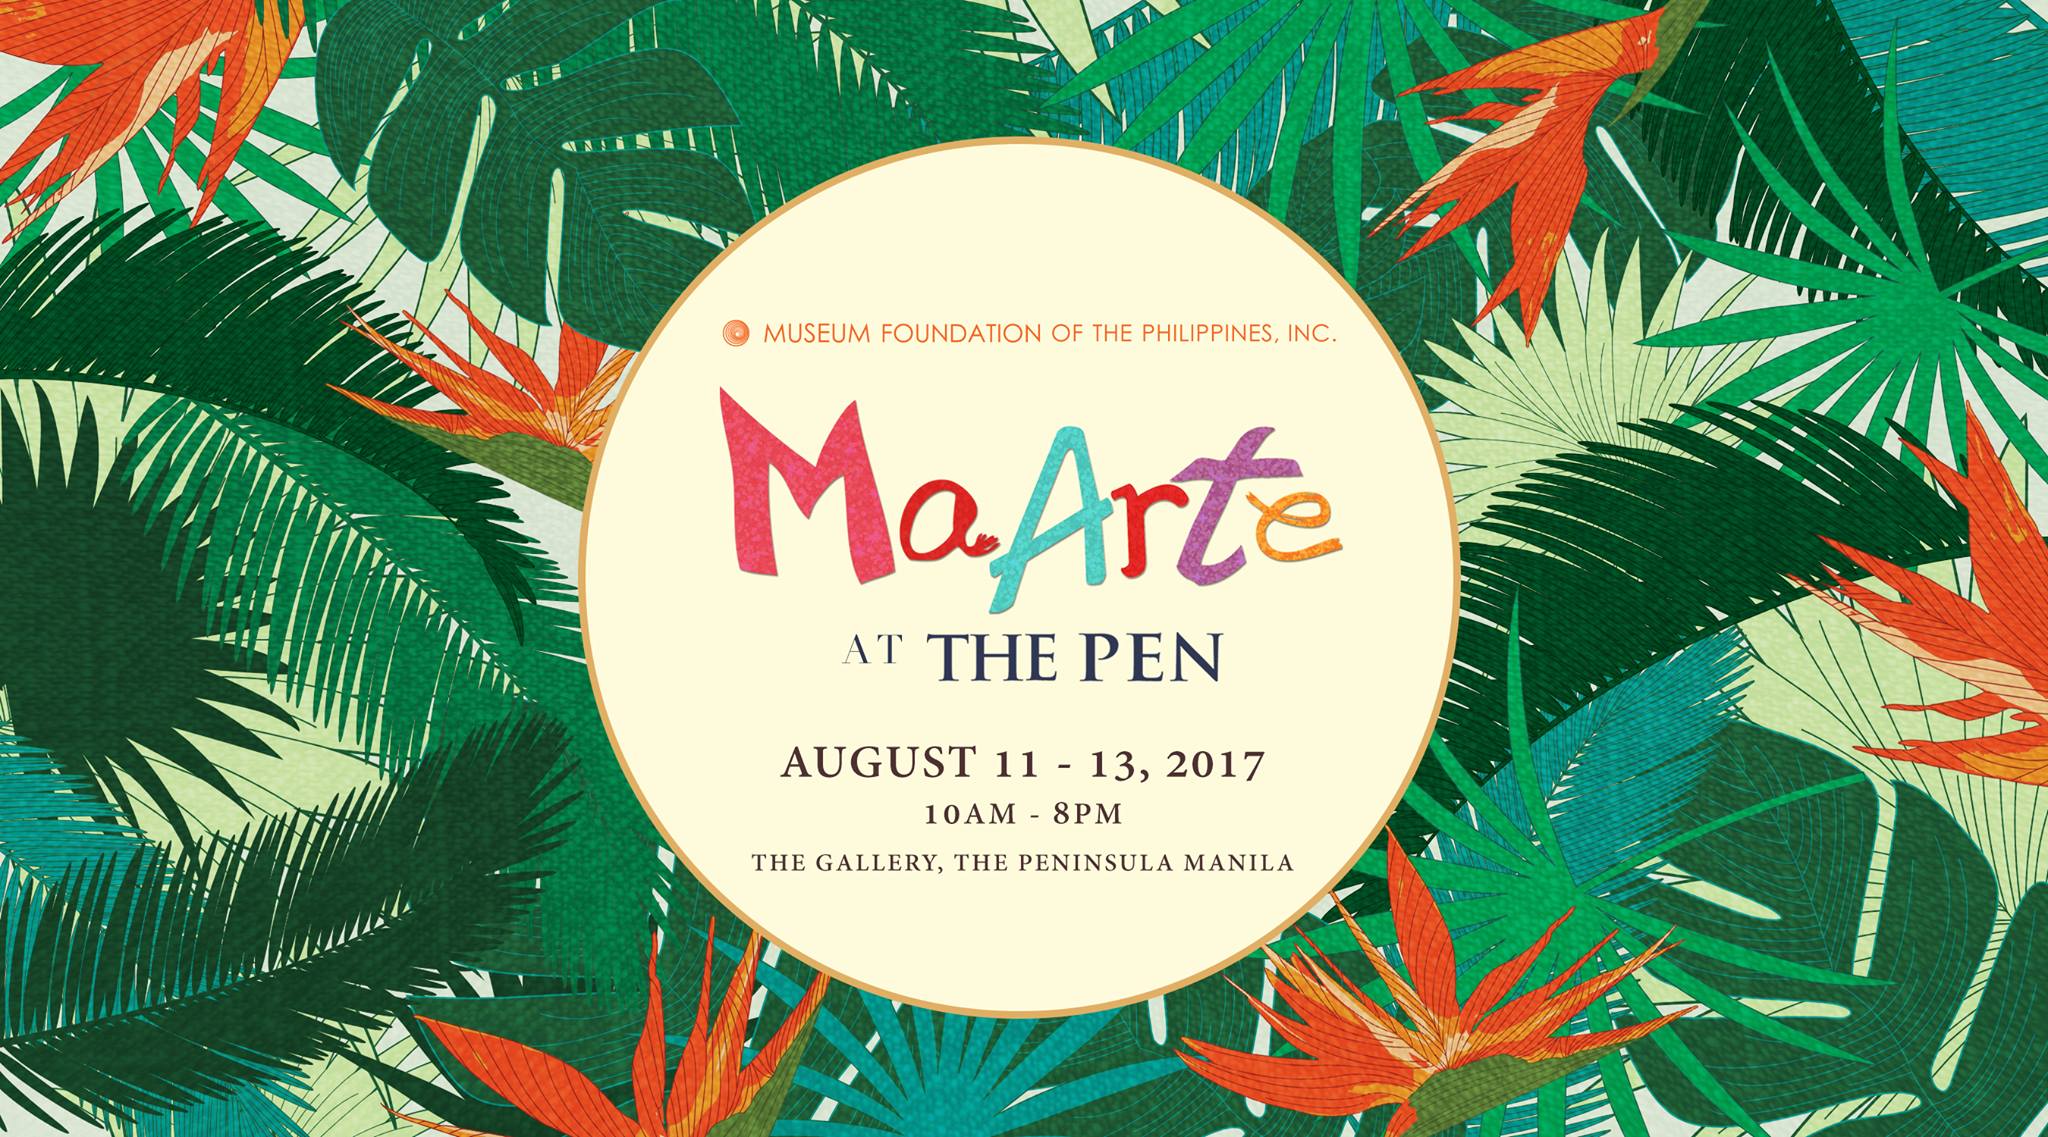 MaArte at The Pen Public · Hosted by Maarte Fair GoingShare clock August 11 – August 13 Aug 11 at 10 AM to Aug 13 at 8 PM pin Show Map The Peninsula Manila About Discussion 134 Going · 120 Interested Share this event with your friends Share Details The Museum Foundation of the Philippines, Inc. is organizing MaArte 2017 to continue its tradition of enhancing Philippine arts and culture and supporting the National Museum of the Philippines. Don't miss this important showcase for emerging micro-entrepreneurs and exceptional display of world-class Filipino craftsmanship. An exciting new collateral event during the three-day trunk show is MaArTEA Talks - a series of conversations with select exhibitors offering their personal entrepreneurial narratives and insights. MaArTEA, a special Afternoon Tea service, will be available at The Pen Lobby during the entire month of August. MaArte at The Pen is co-presented by The Peninsula Manila. #MaArteAtThePen #SupportNationalMuseum #BeMaArteForACause #PenMoments